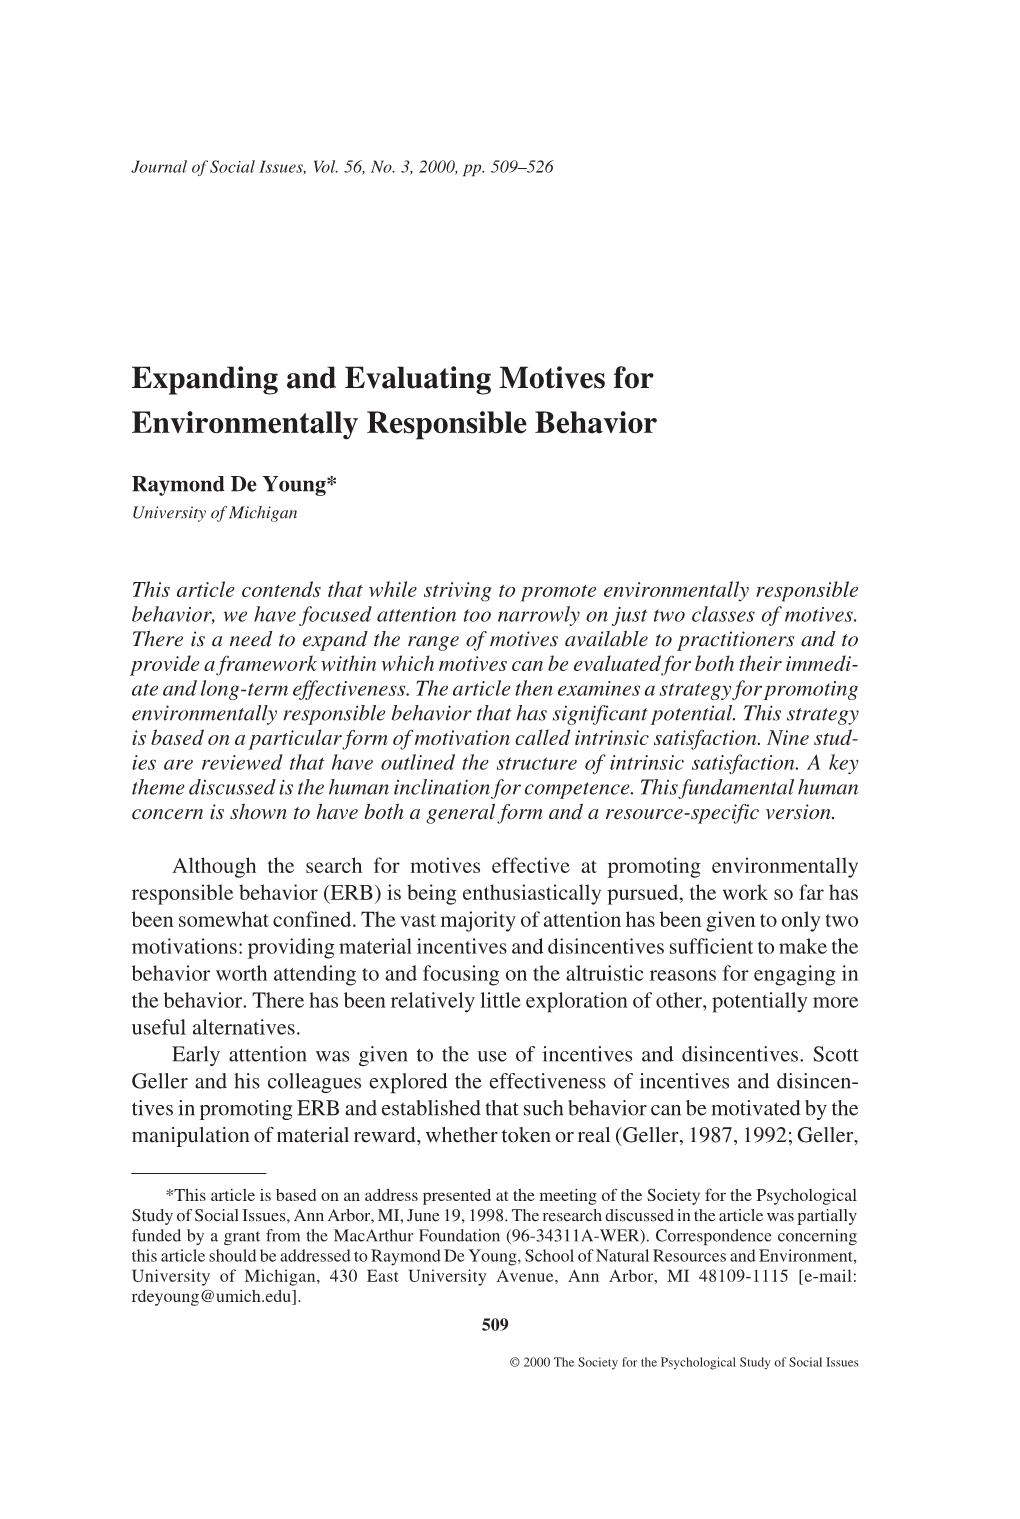 Expanding and Evaluating Motives for Environmentally Responsible Behavior